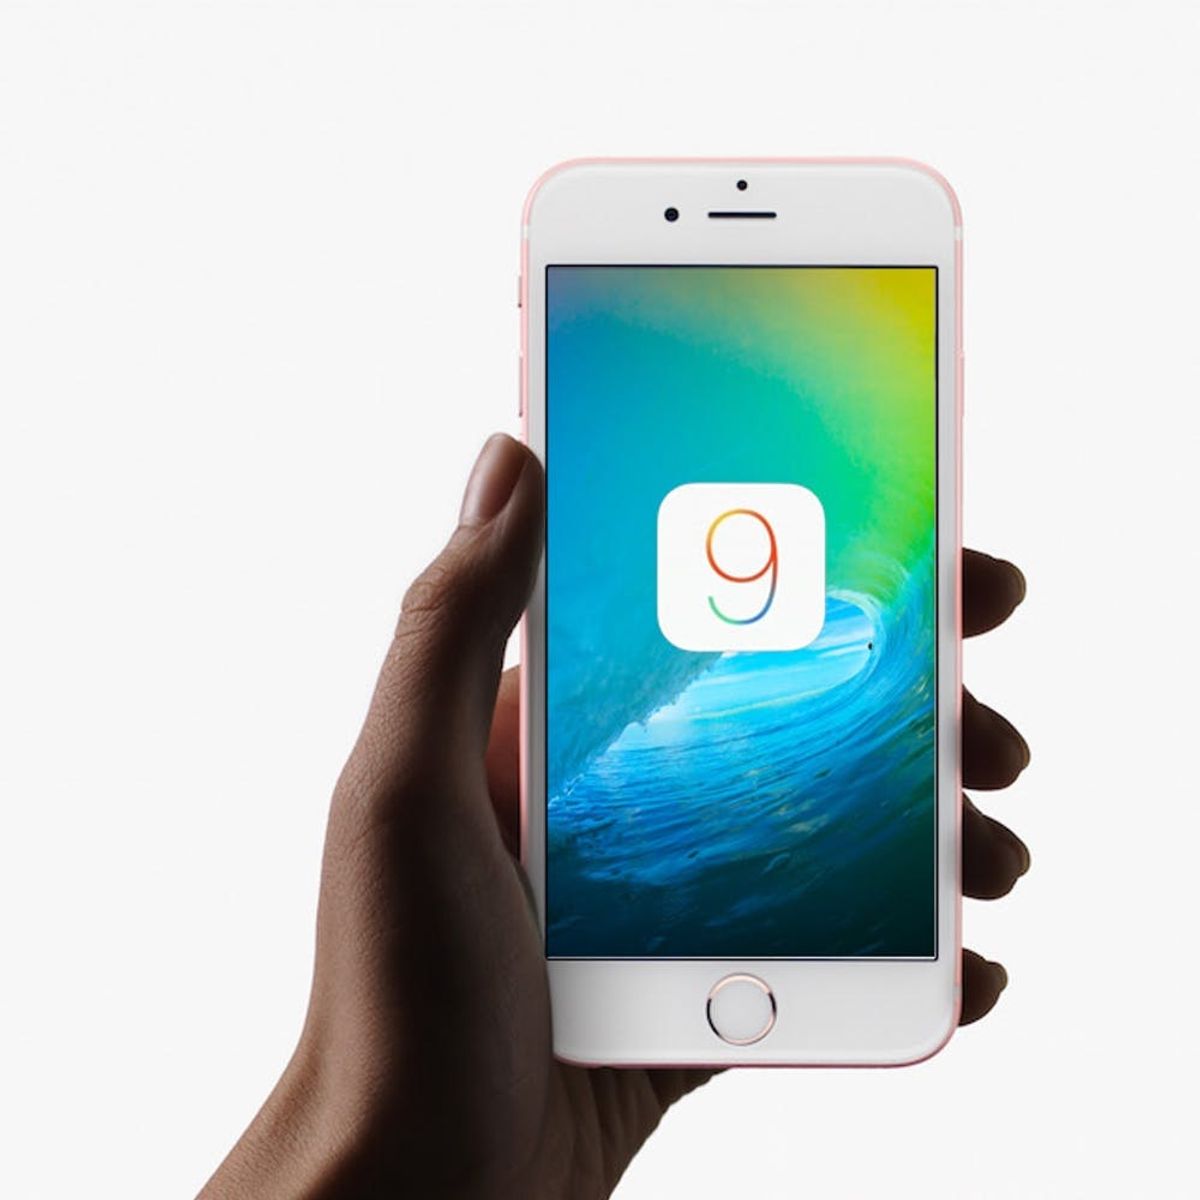 Tech Trick of the Week: 5 Common iOS 9 Bugs AND How to Fix Them